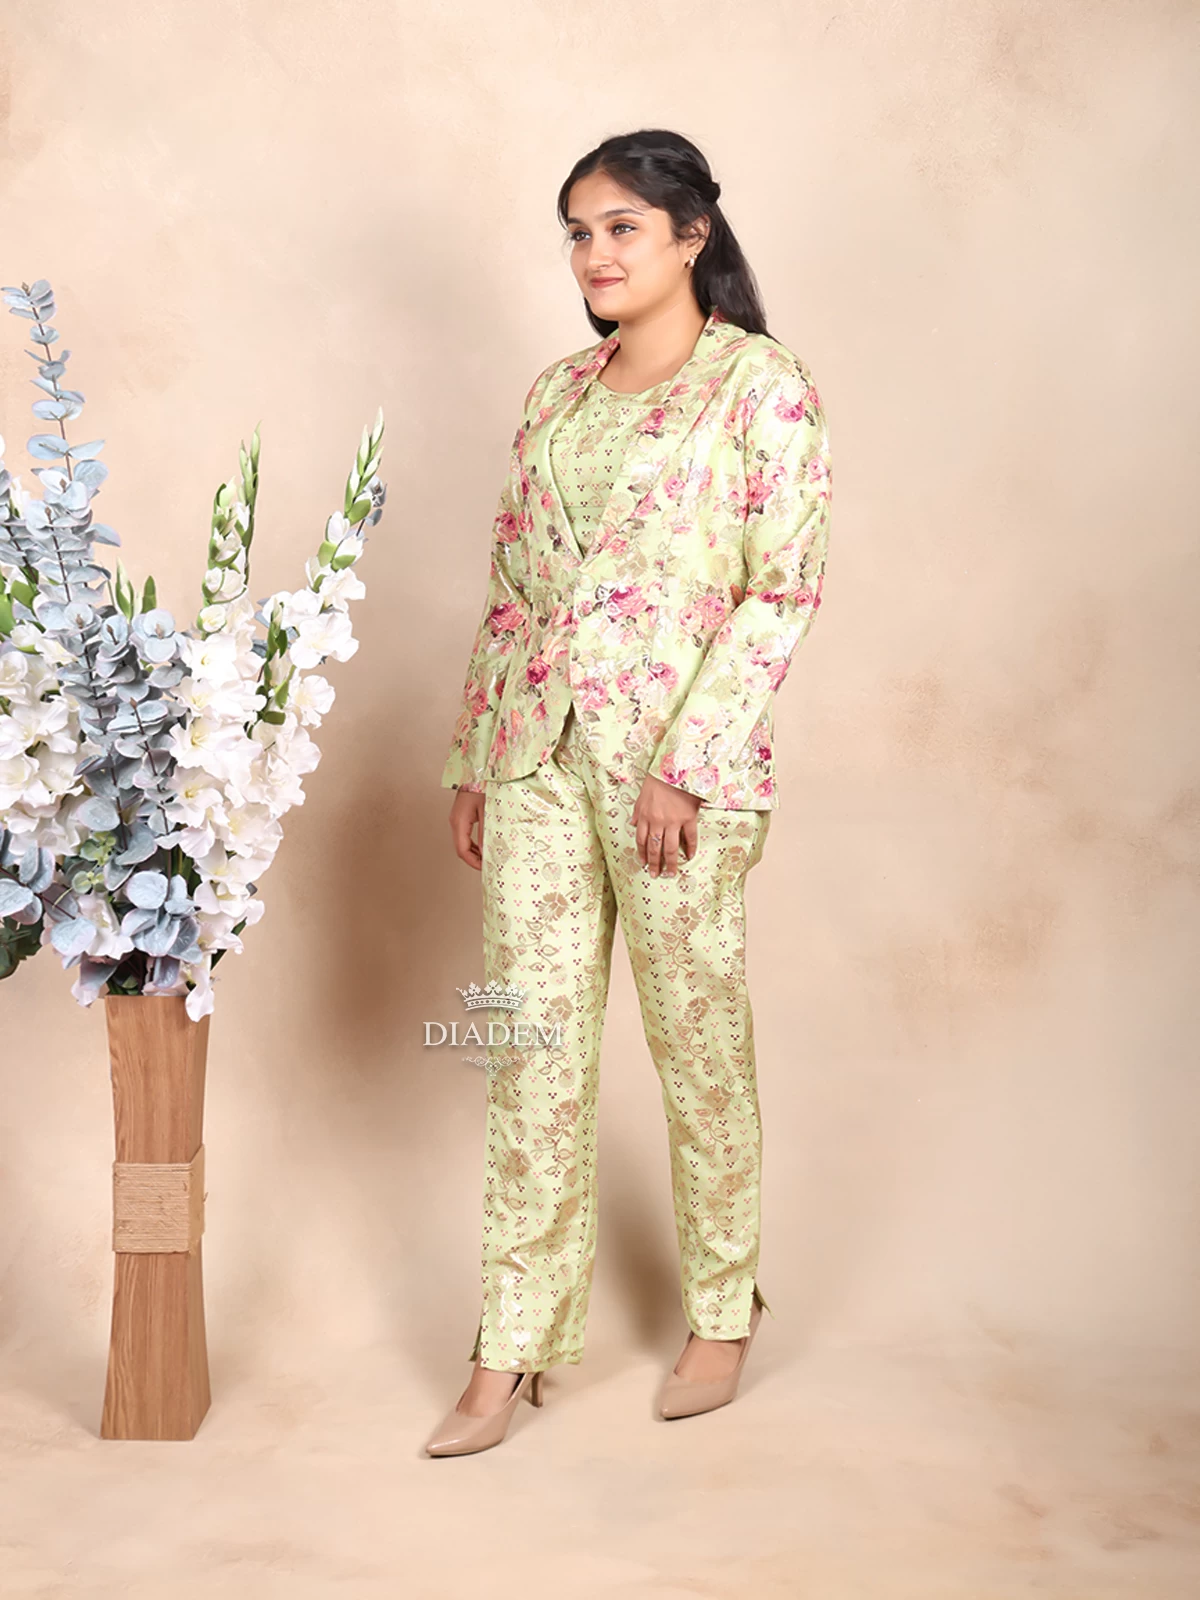 Pista Green Pant Suit Adorned With Floral Prints Paired With Matching Overcoat